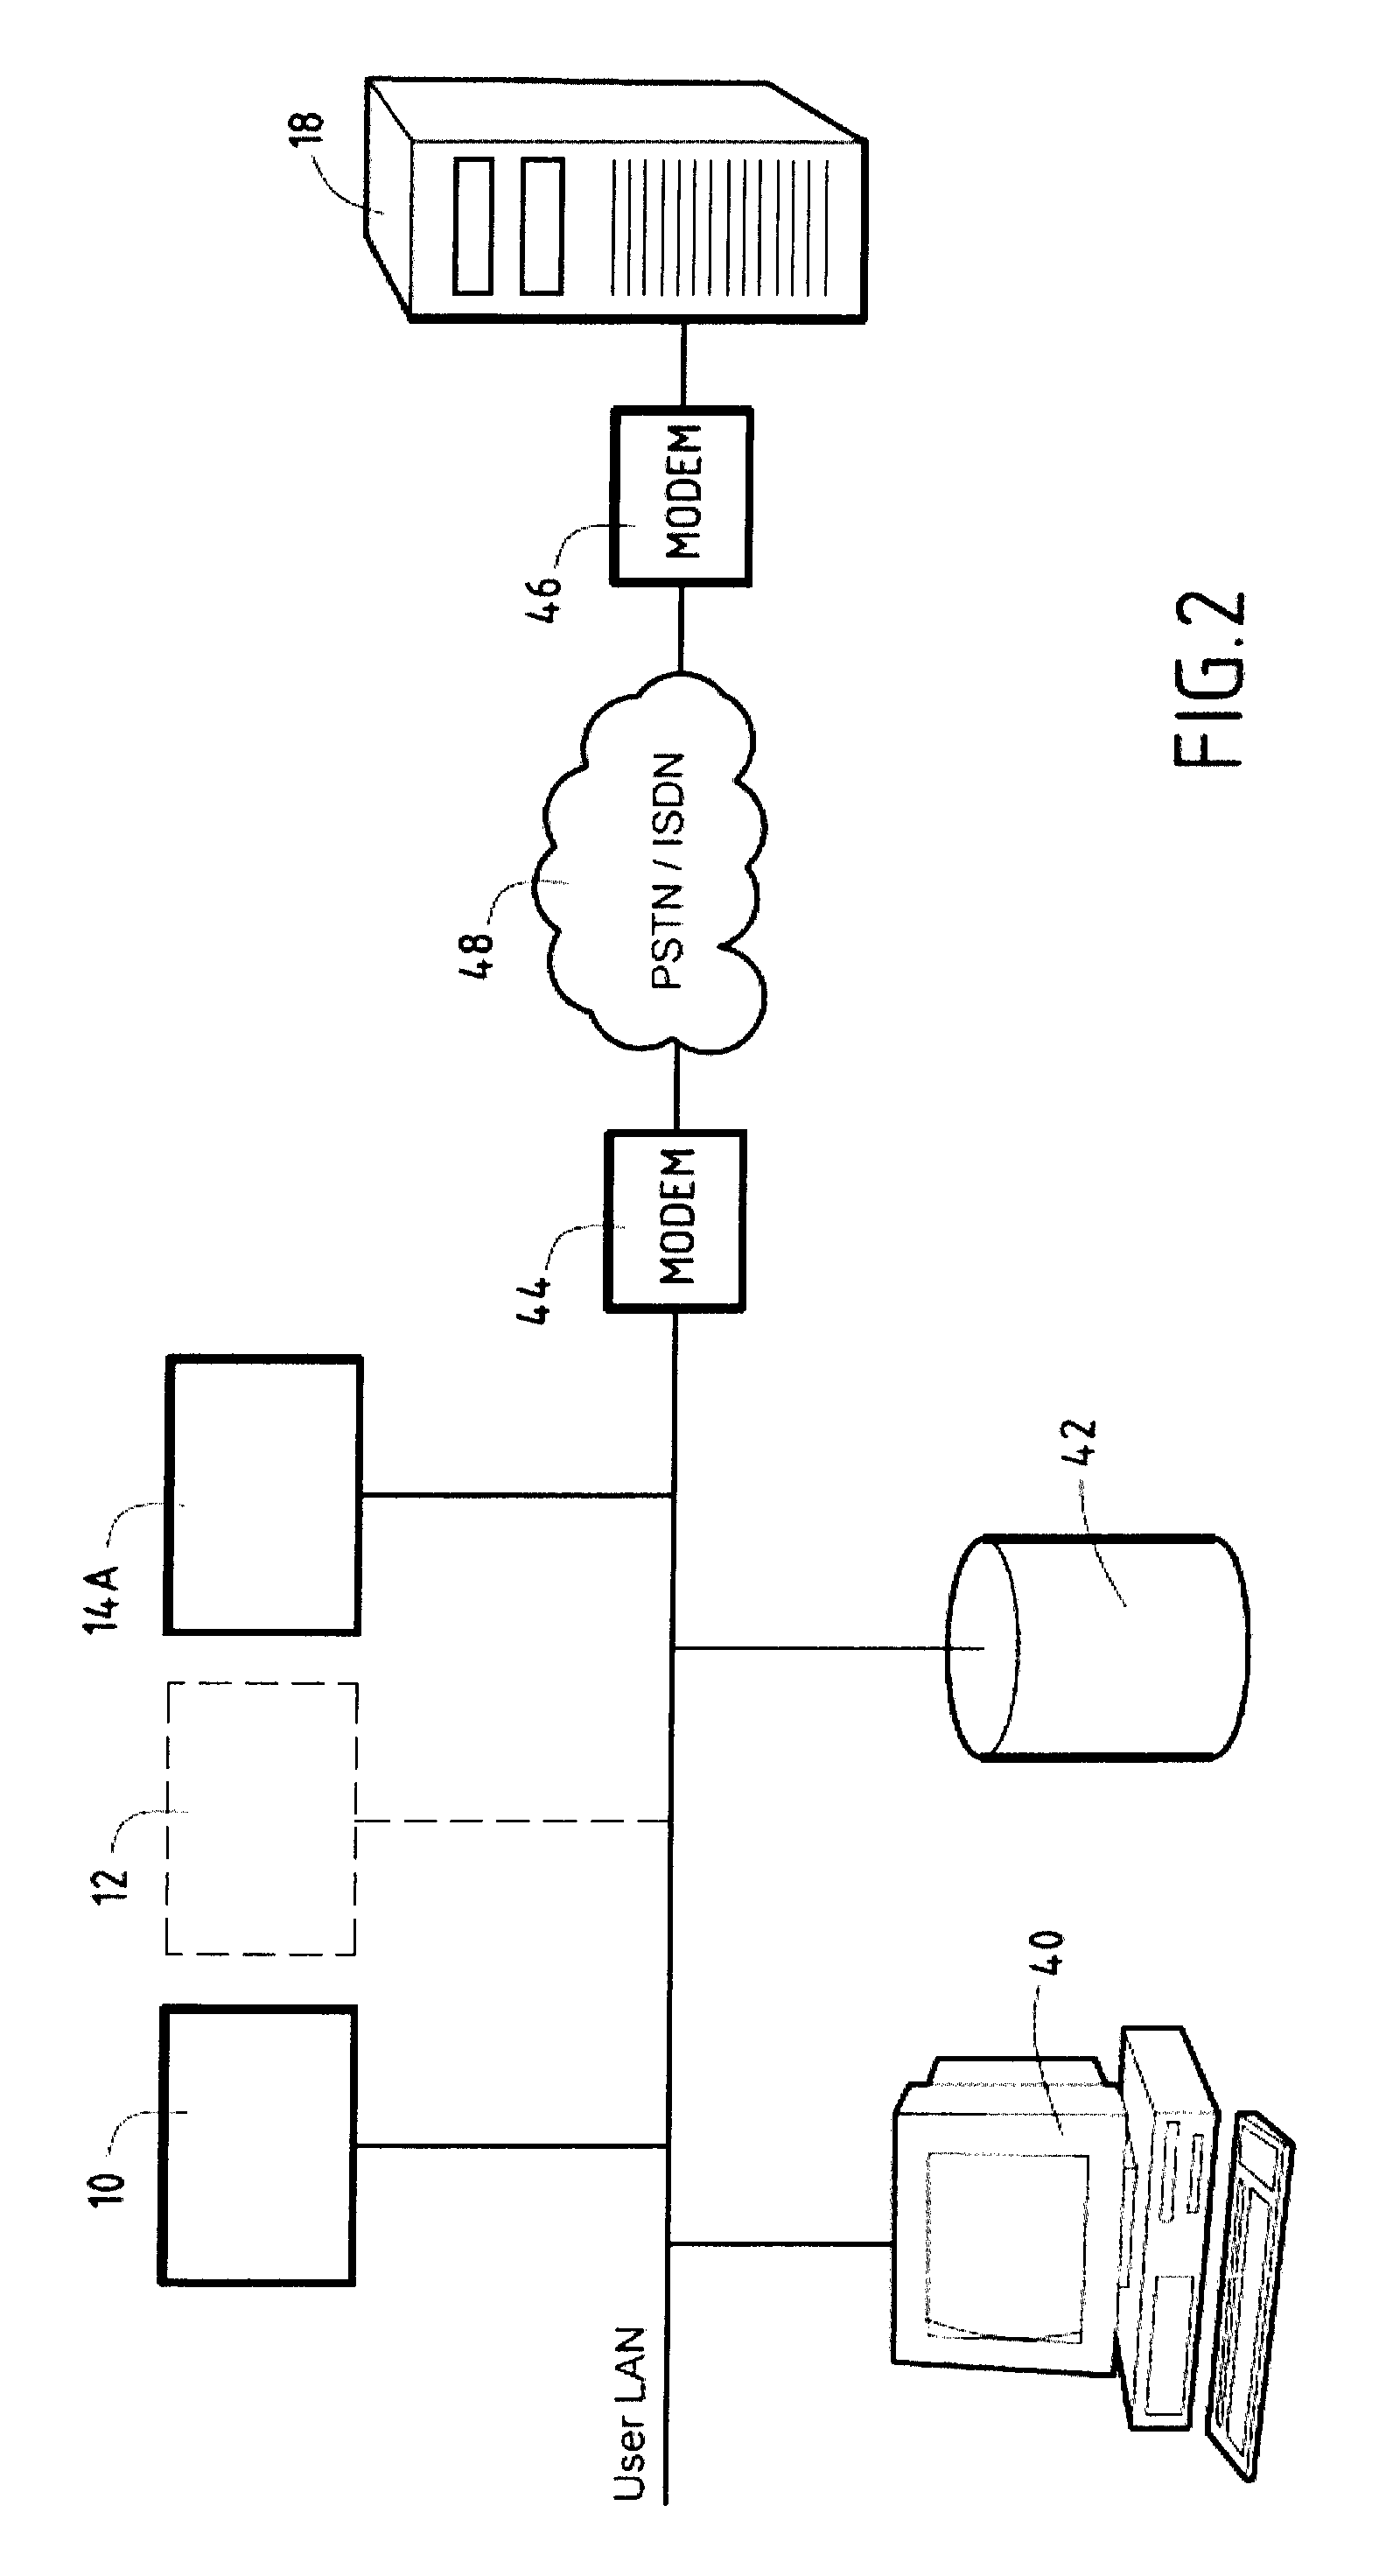 Method and system for validating and verifying mail items